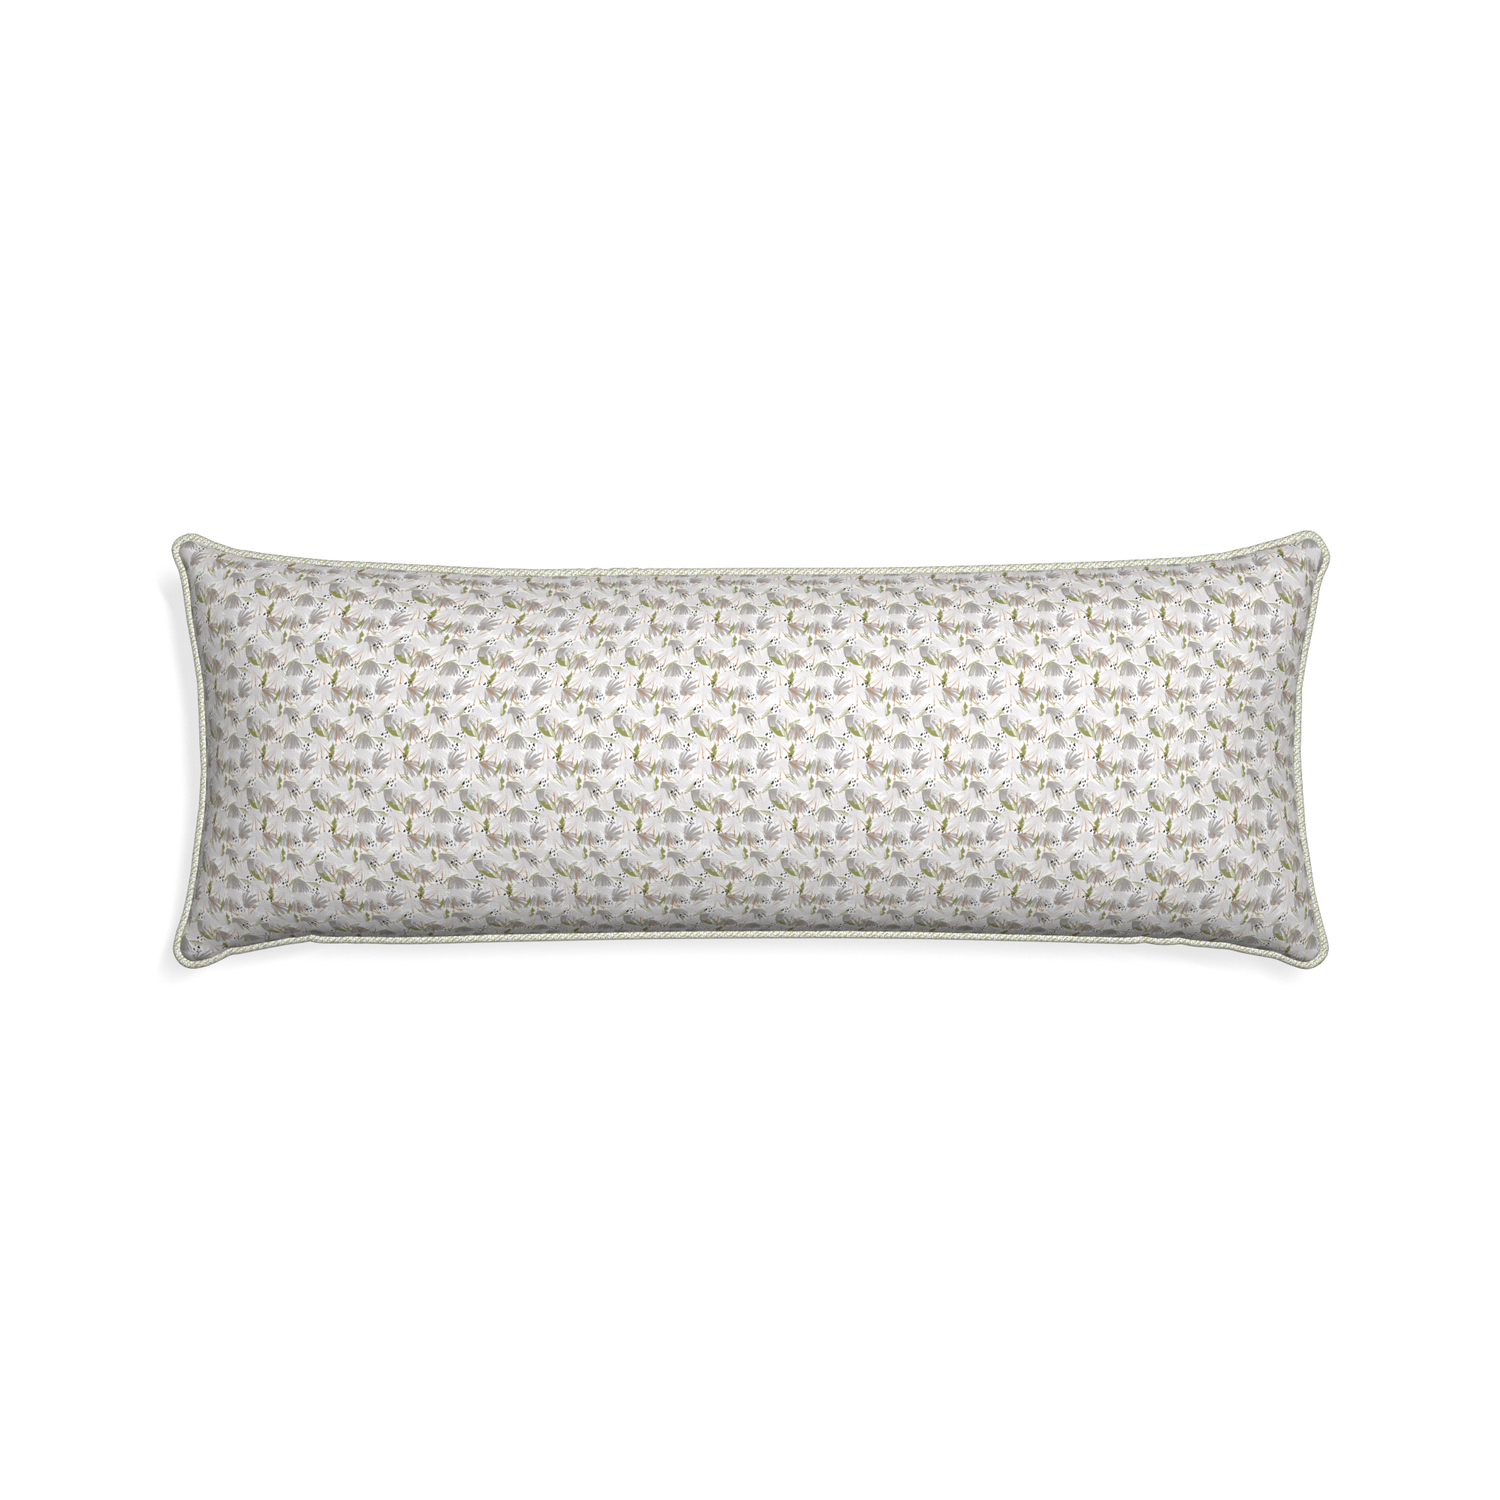 Xl-lumbar eden grey custom grey floralpillow with l piping on white background